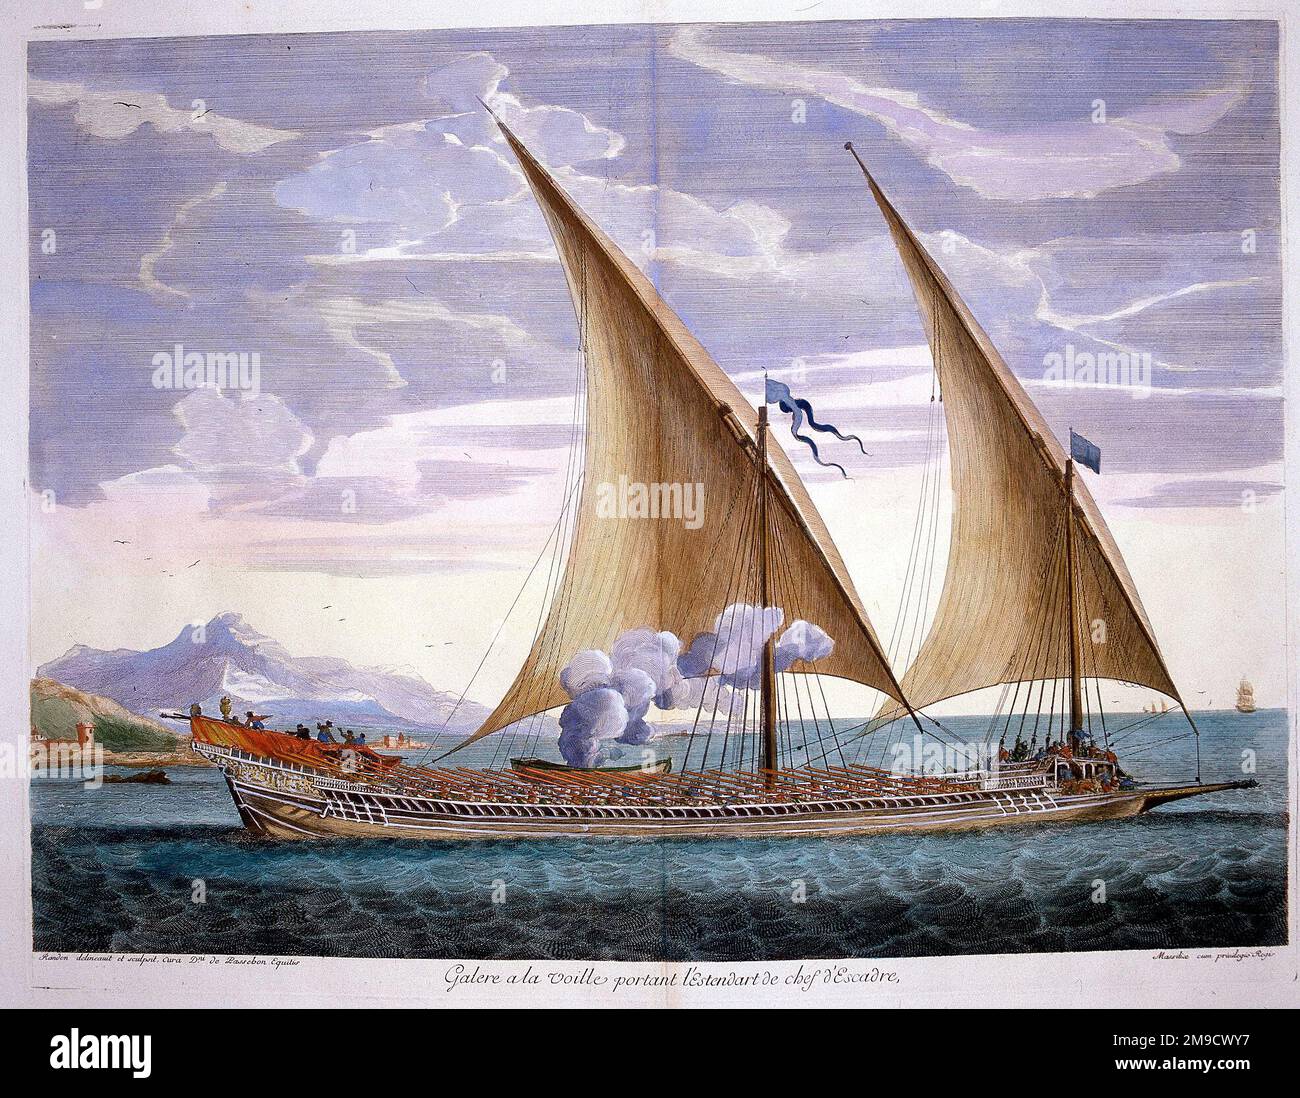 17th century French sailing galley with Admiral standard Stock Photo